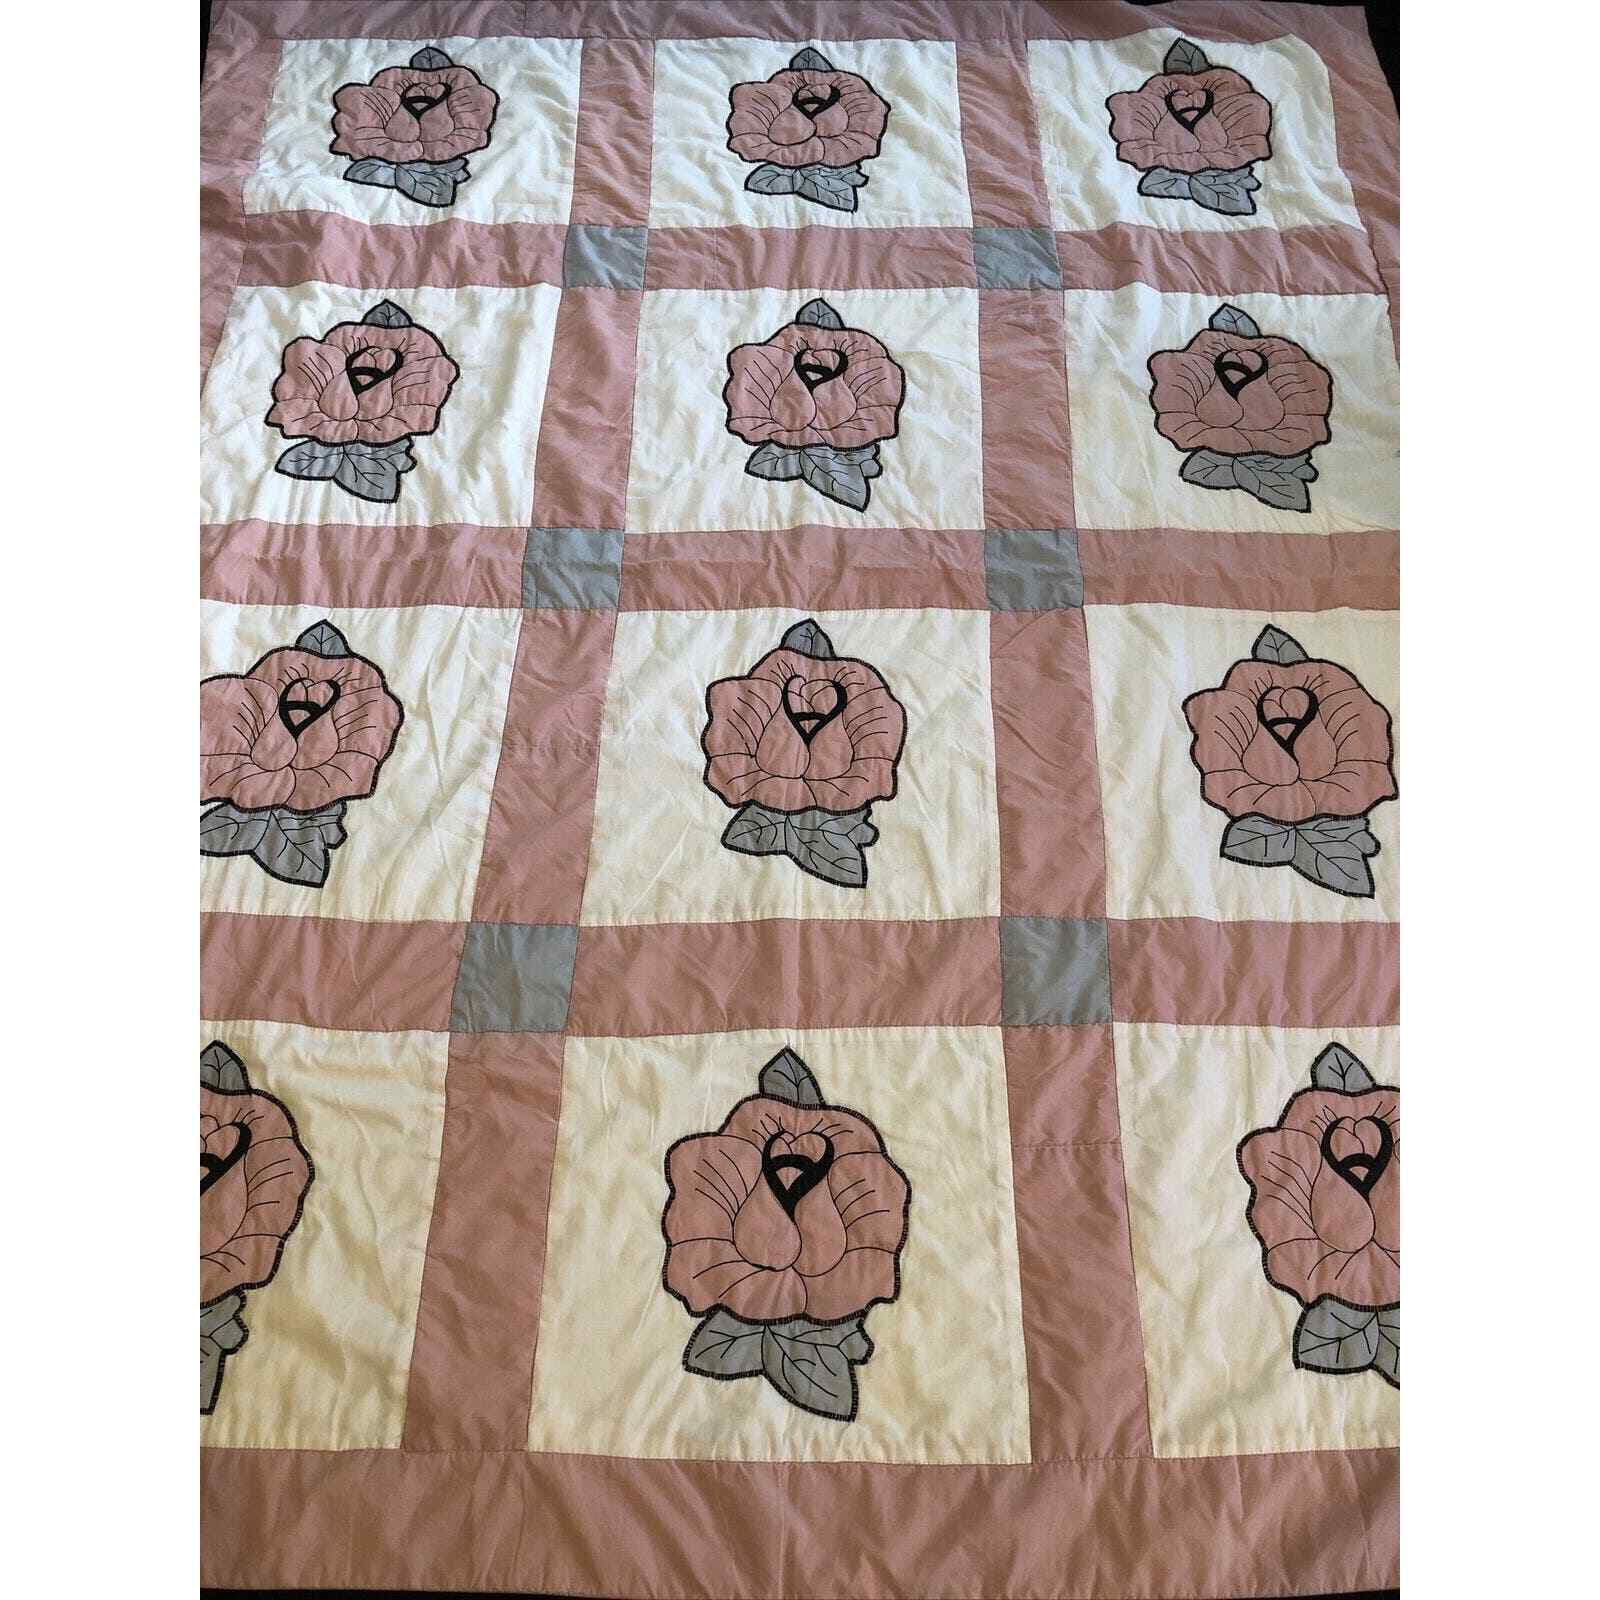 Vintage Pansy Quilt 93x78